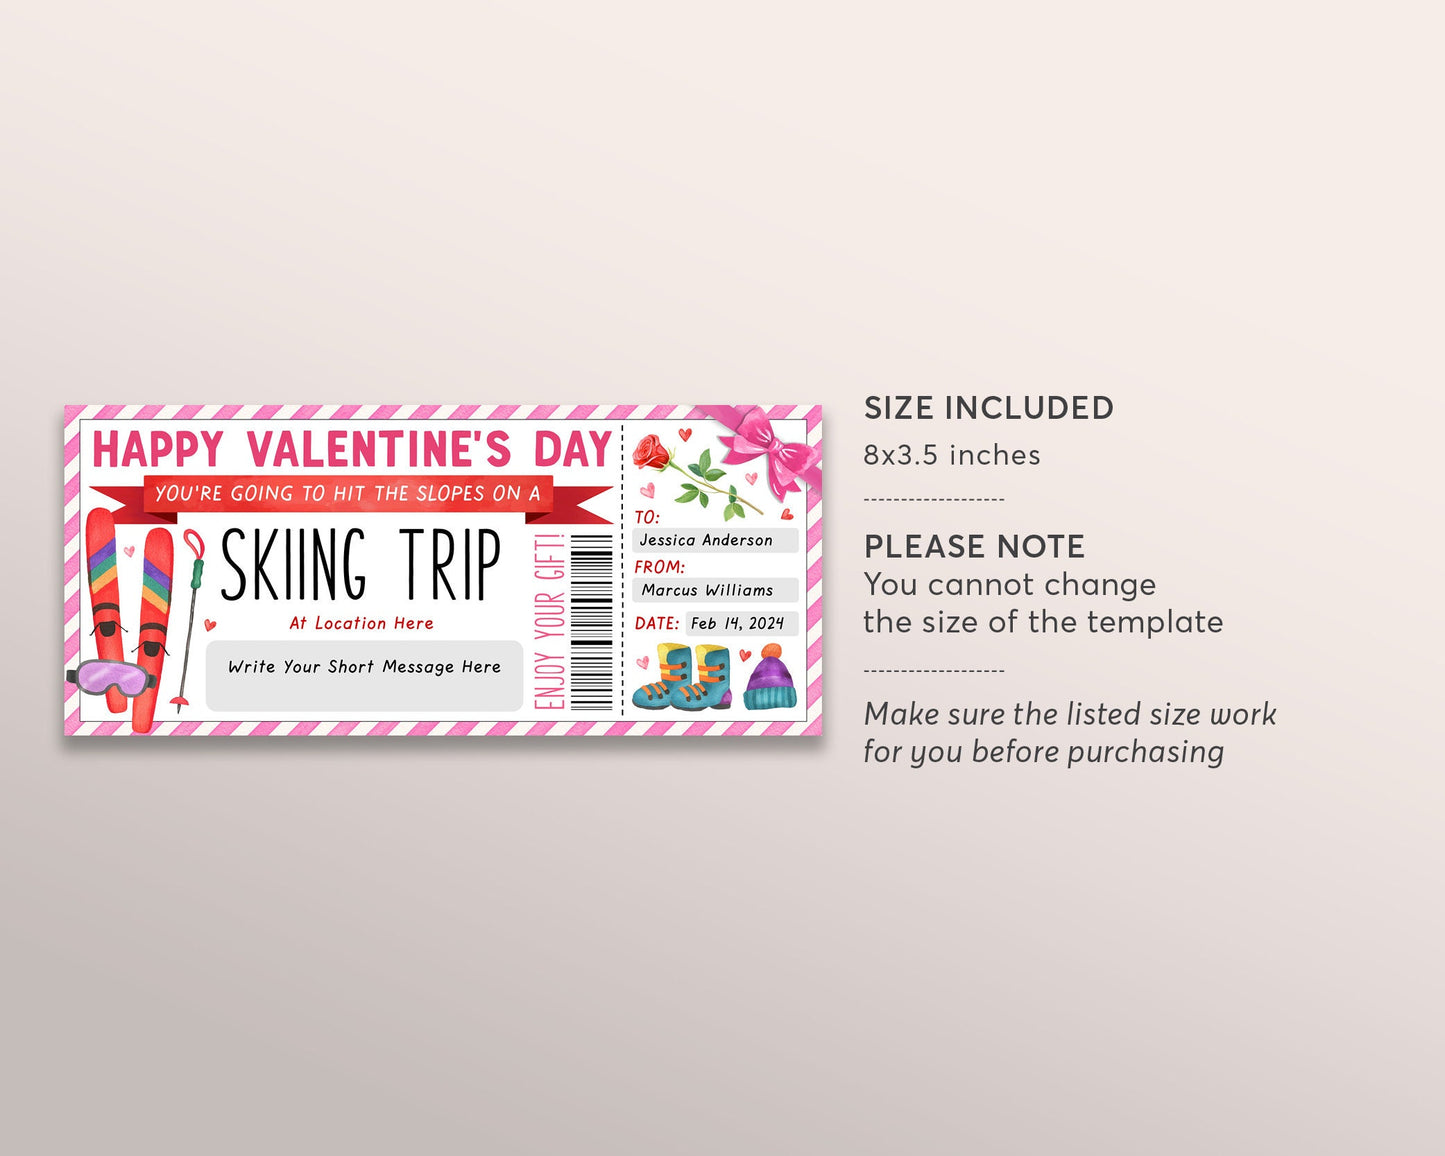 Valentines Day Ski Pass Gift Certificate Editable Template, Anniversary Surprise Holiday Skiing Trip Vacation Gift Voucher, Skiing Lessons